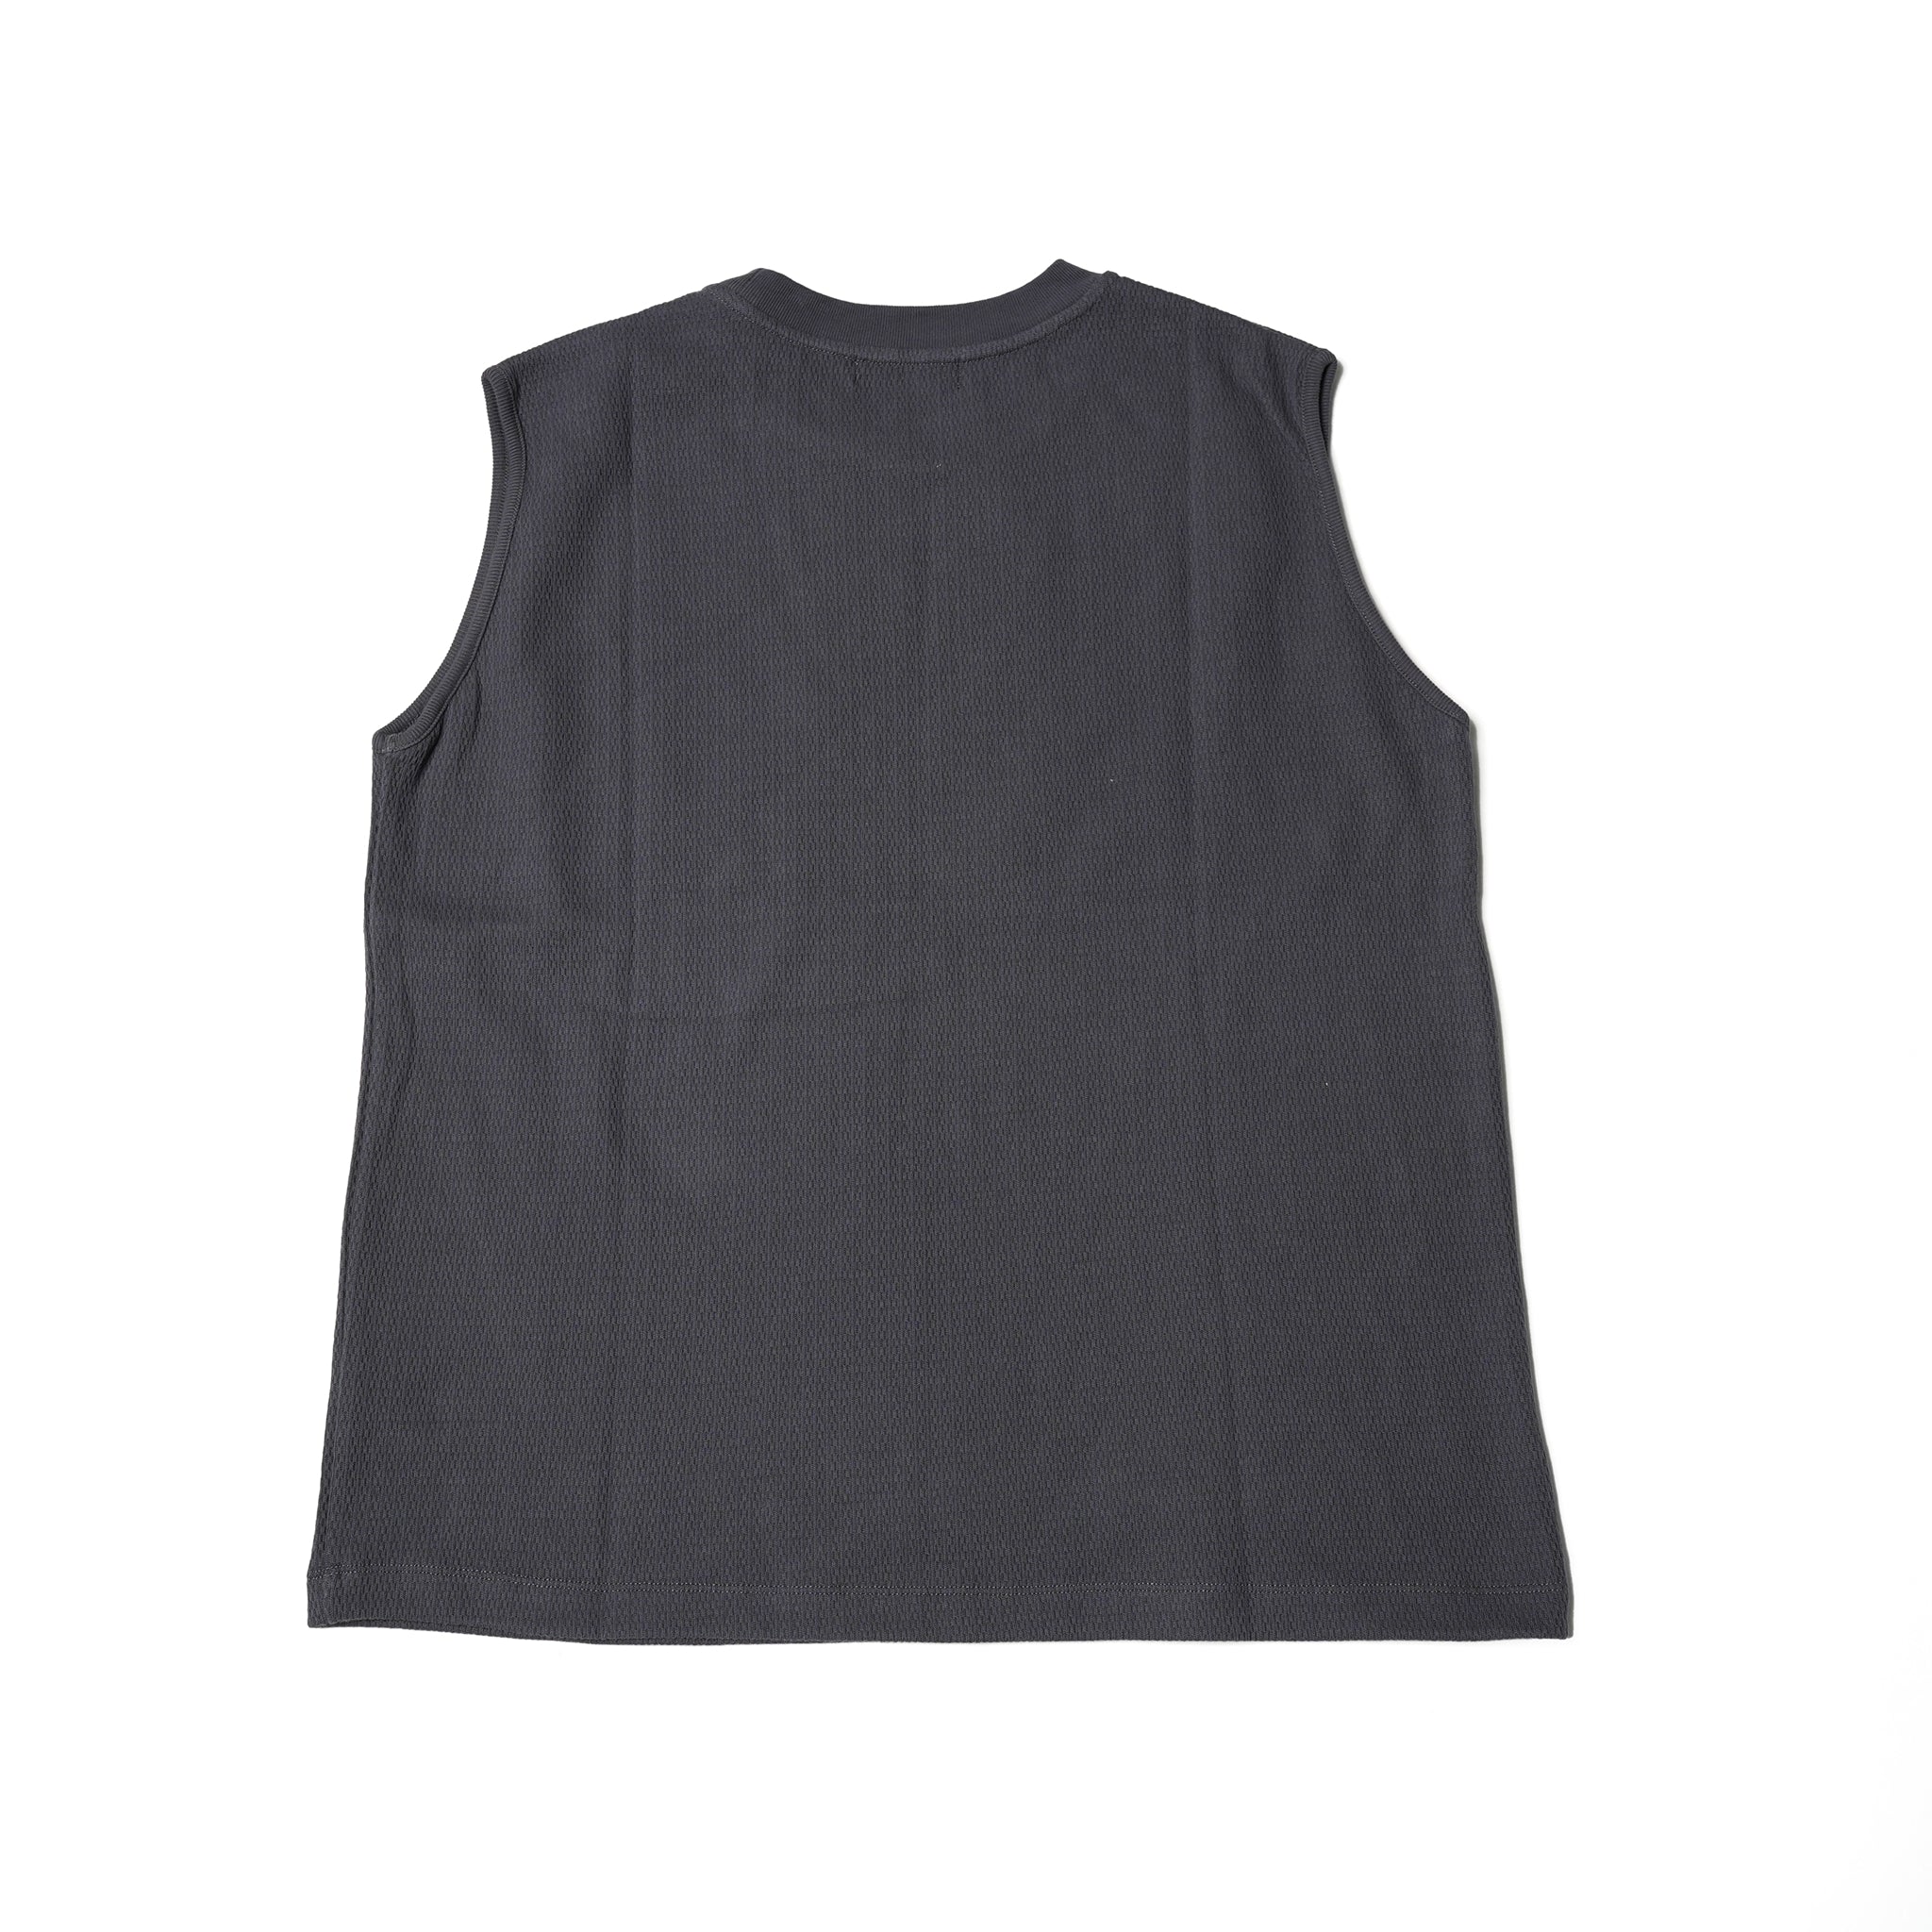 No:C2316908 | Name:ANY TIME 0 SLEEVE | Color:01-Natural/02-Charcoal【NASNGWAM_ナスングワム】【ネコポス選択可能】